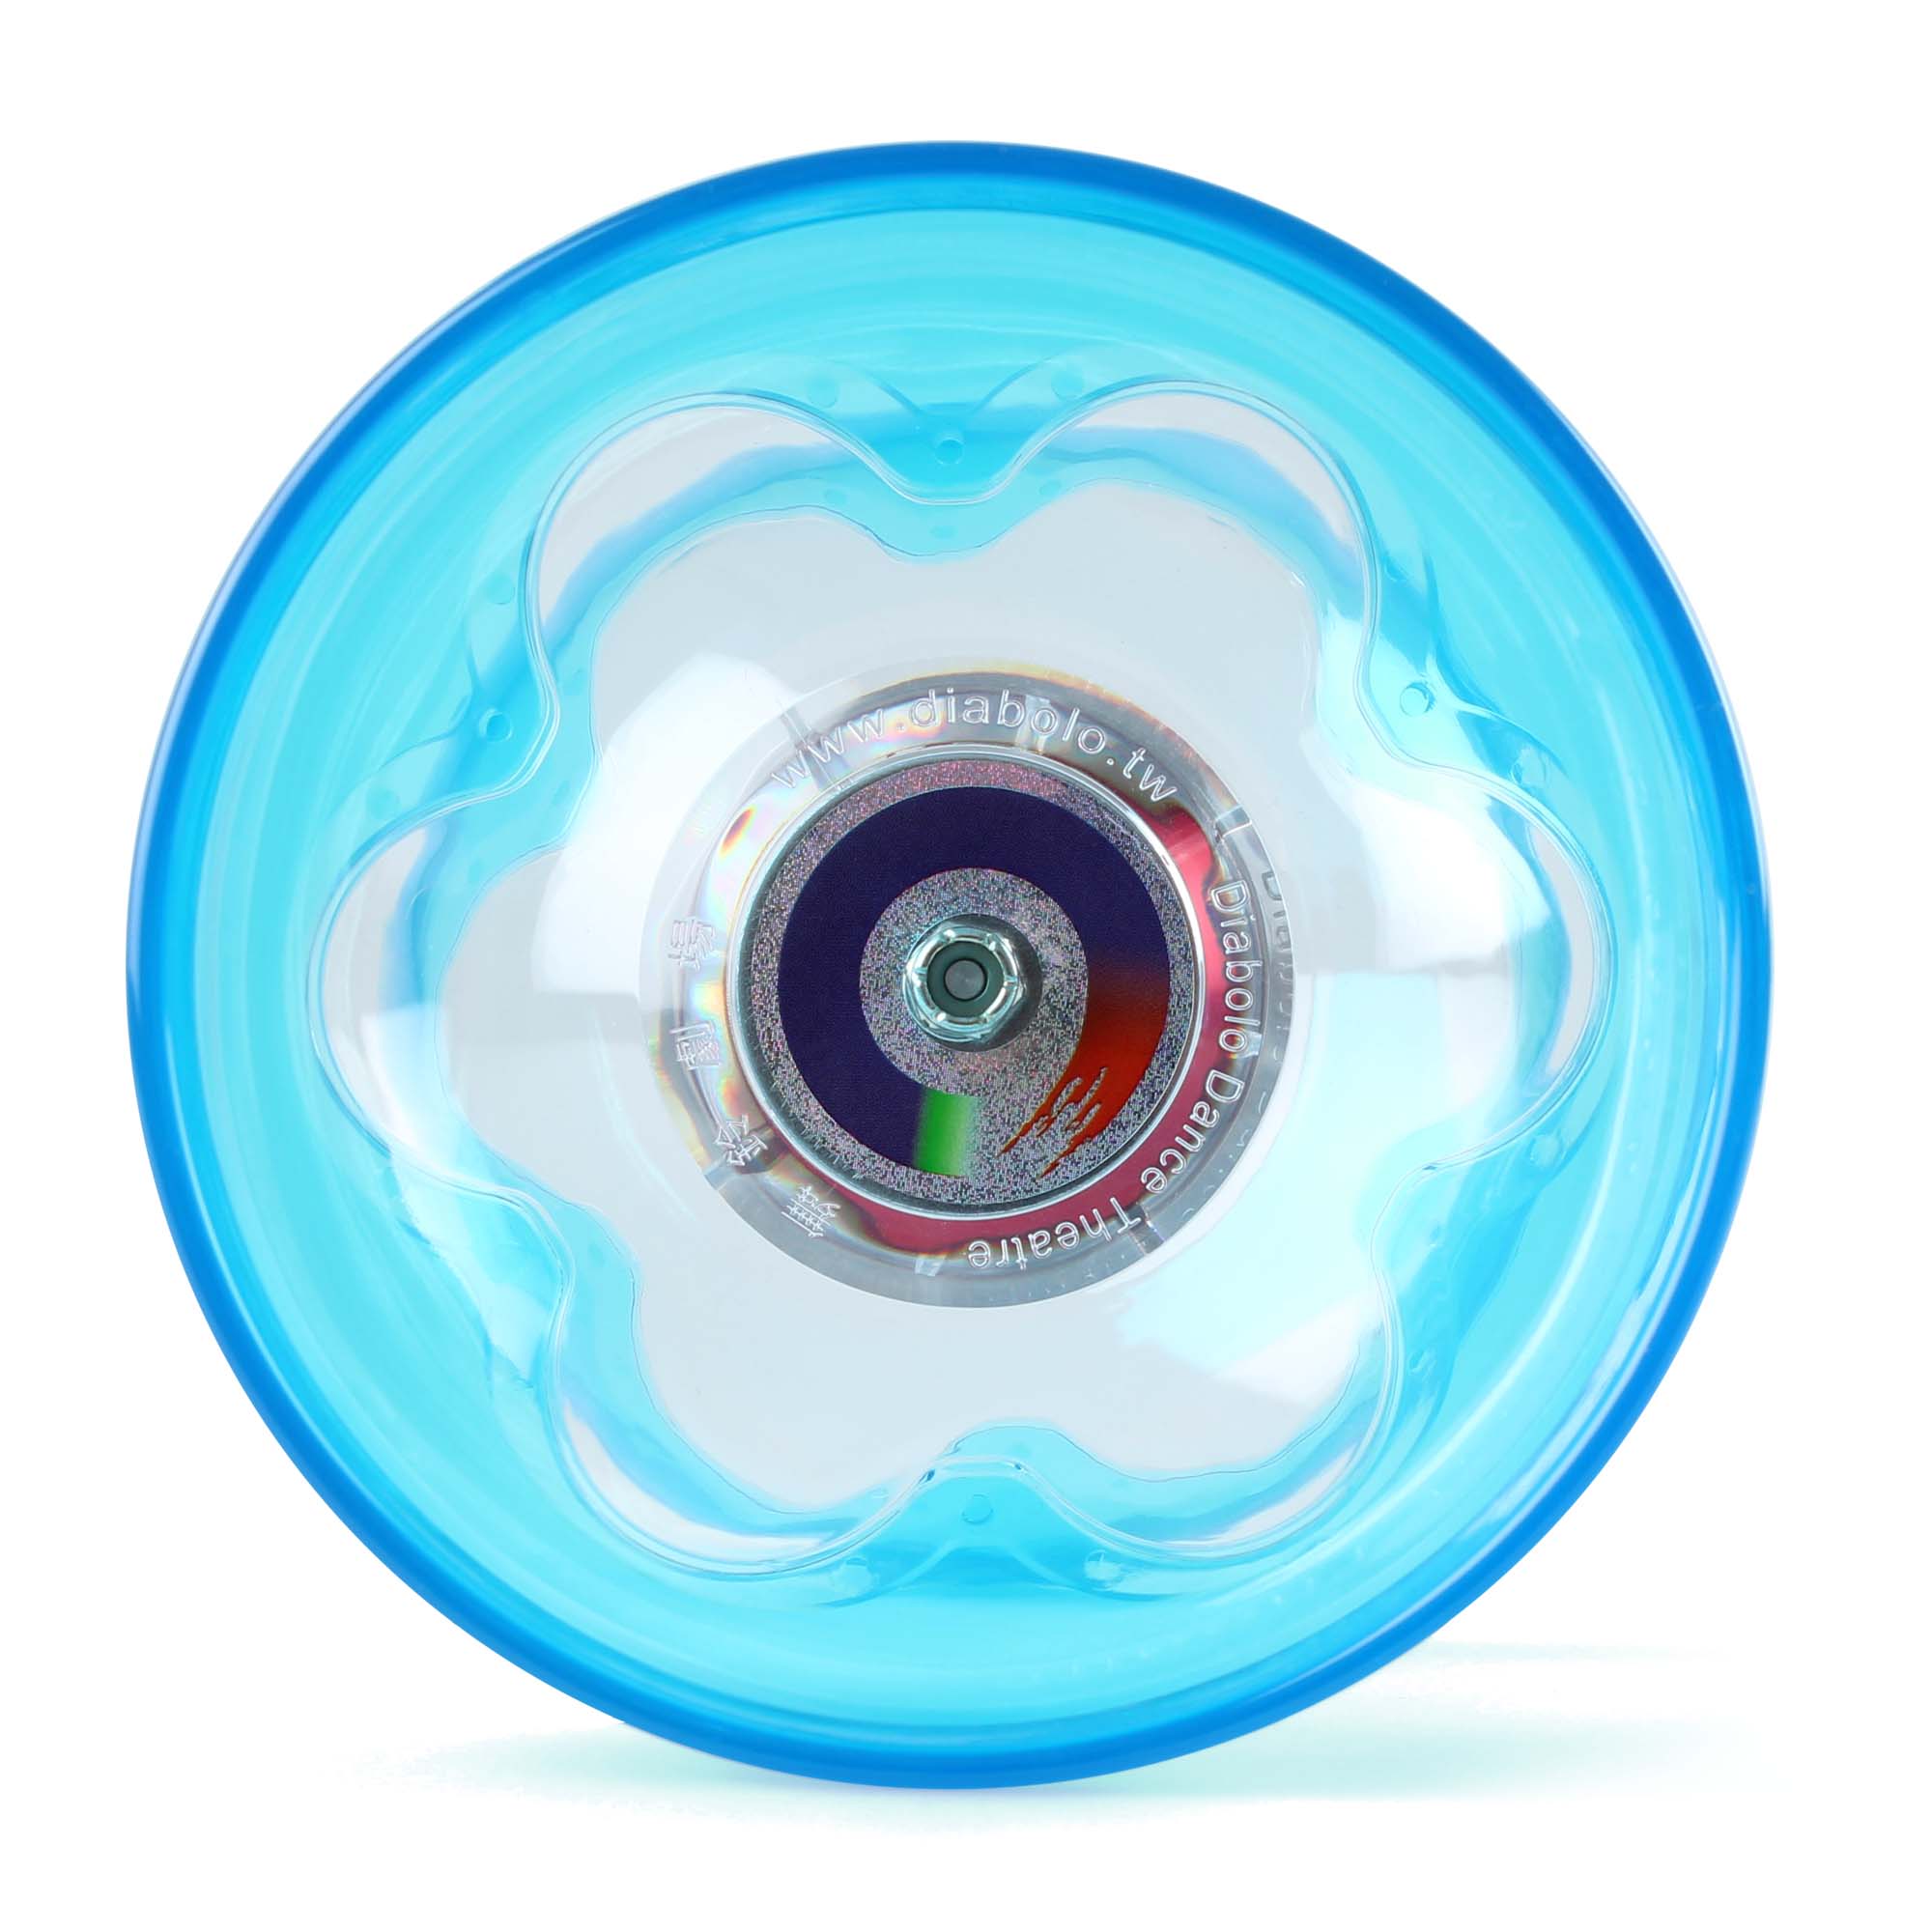 Top view of blue hyperspin diabolo